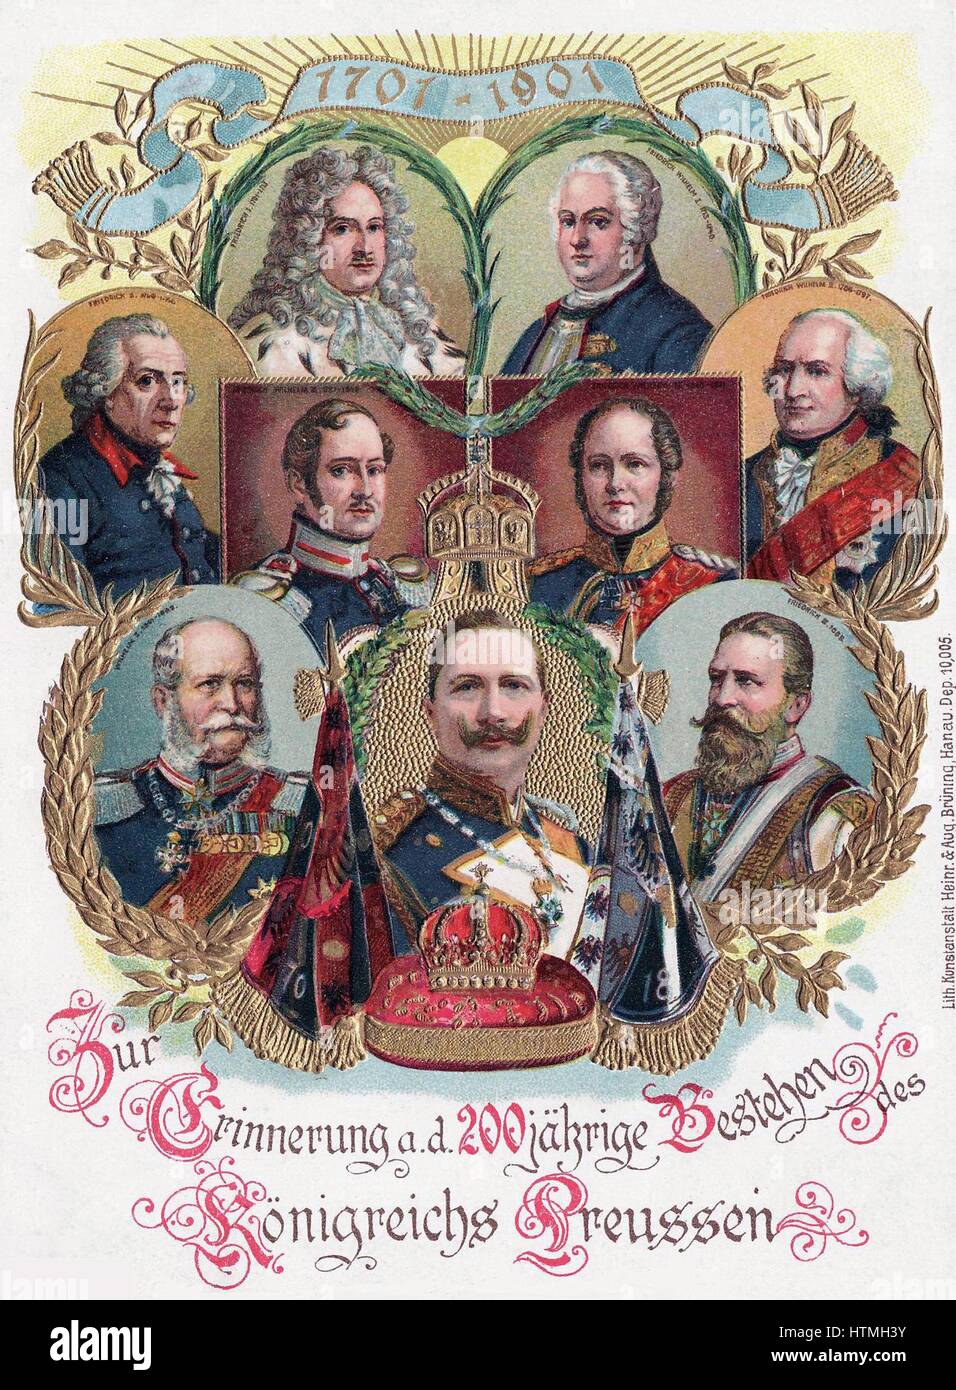 Postcard to commemorate the 200 anniversary of the Kingdom of Prussia 1902. Shows Frederick I, Frederick Wilhelm I, Frederick Wilhelm II, Frederick The Great, Kaiser Wilhelm II, Frederick III, Wilhelm I, Frederick William IV and Frederick William III Stock Photo